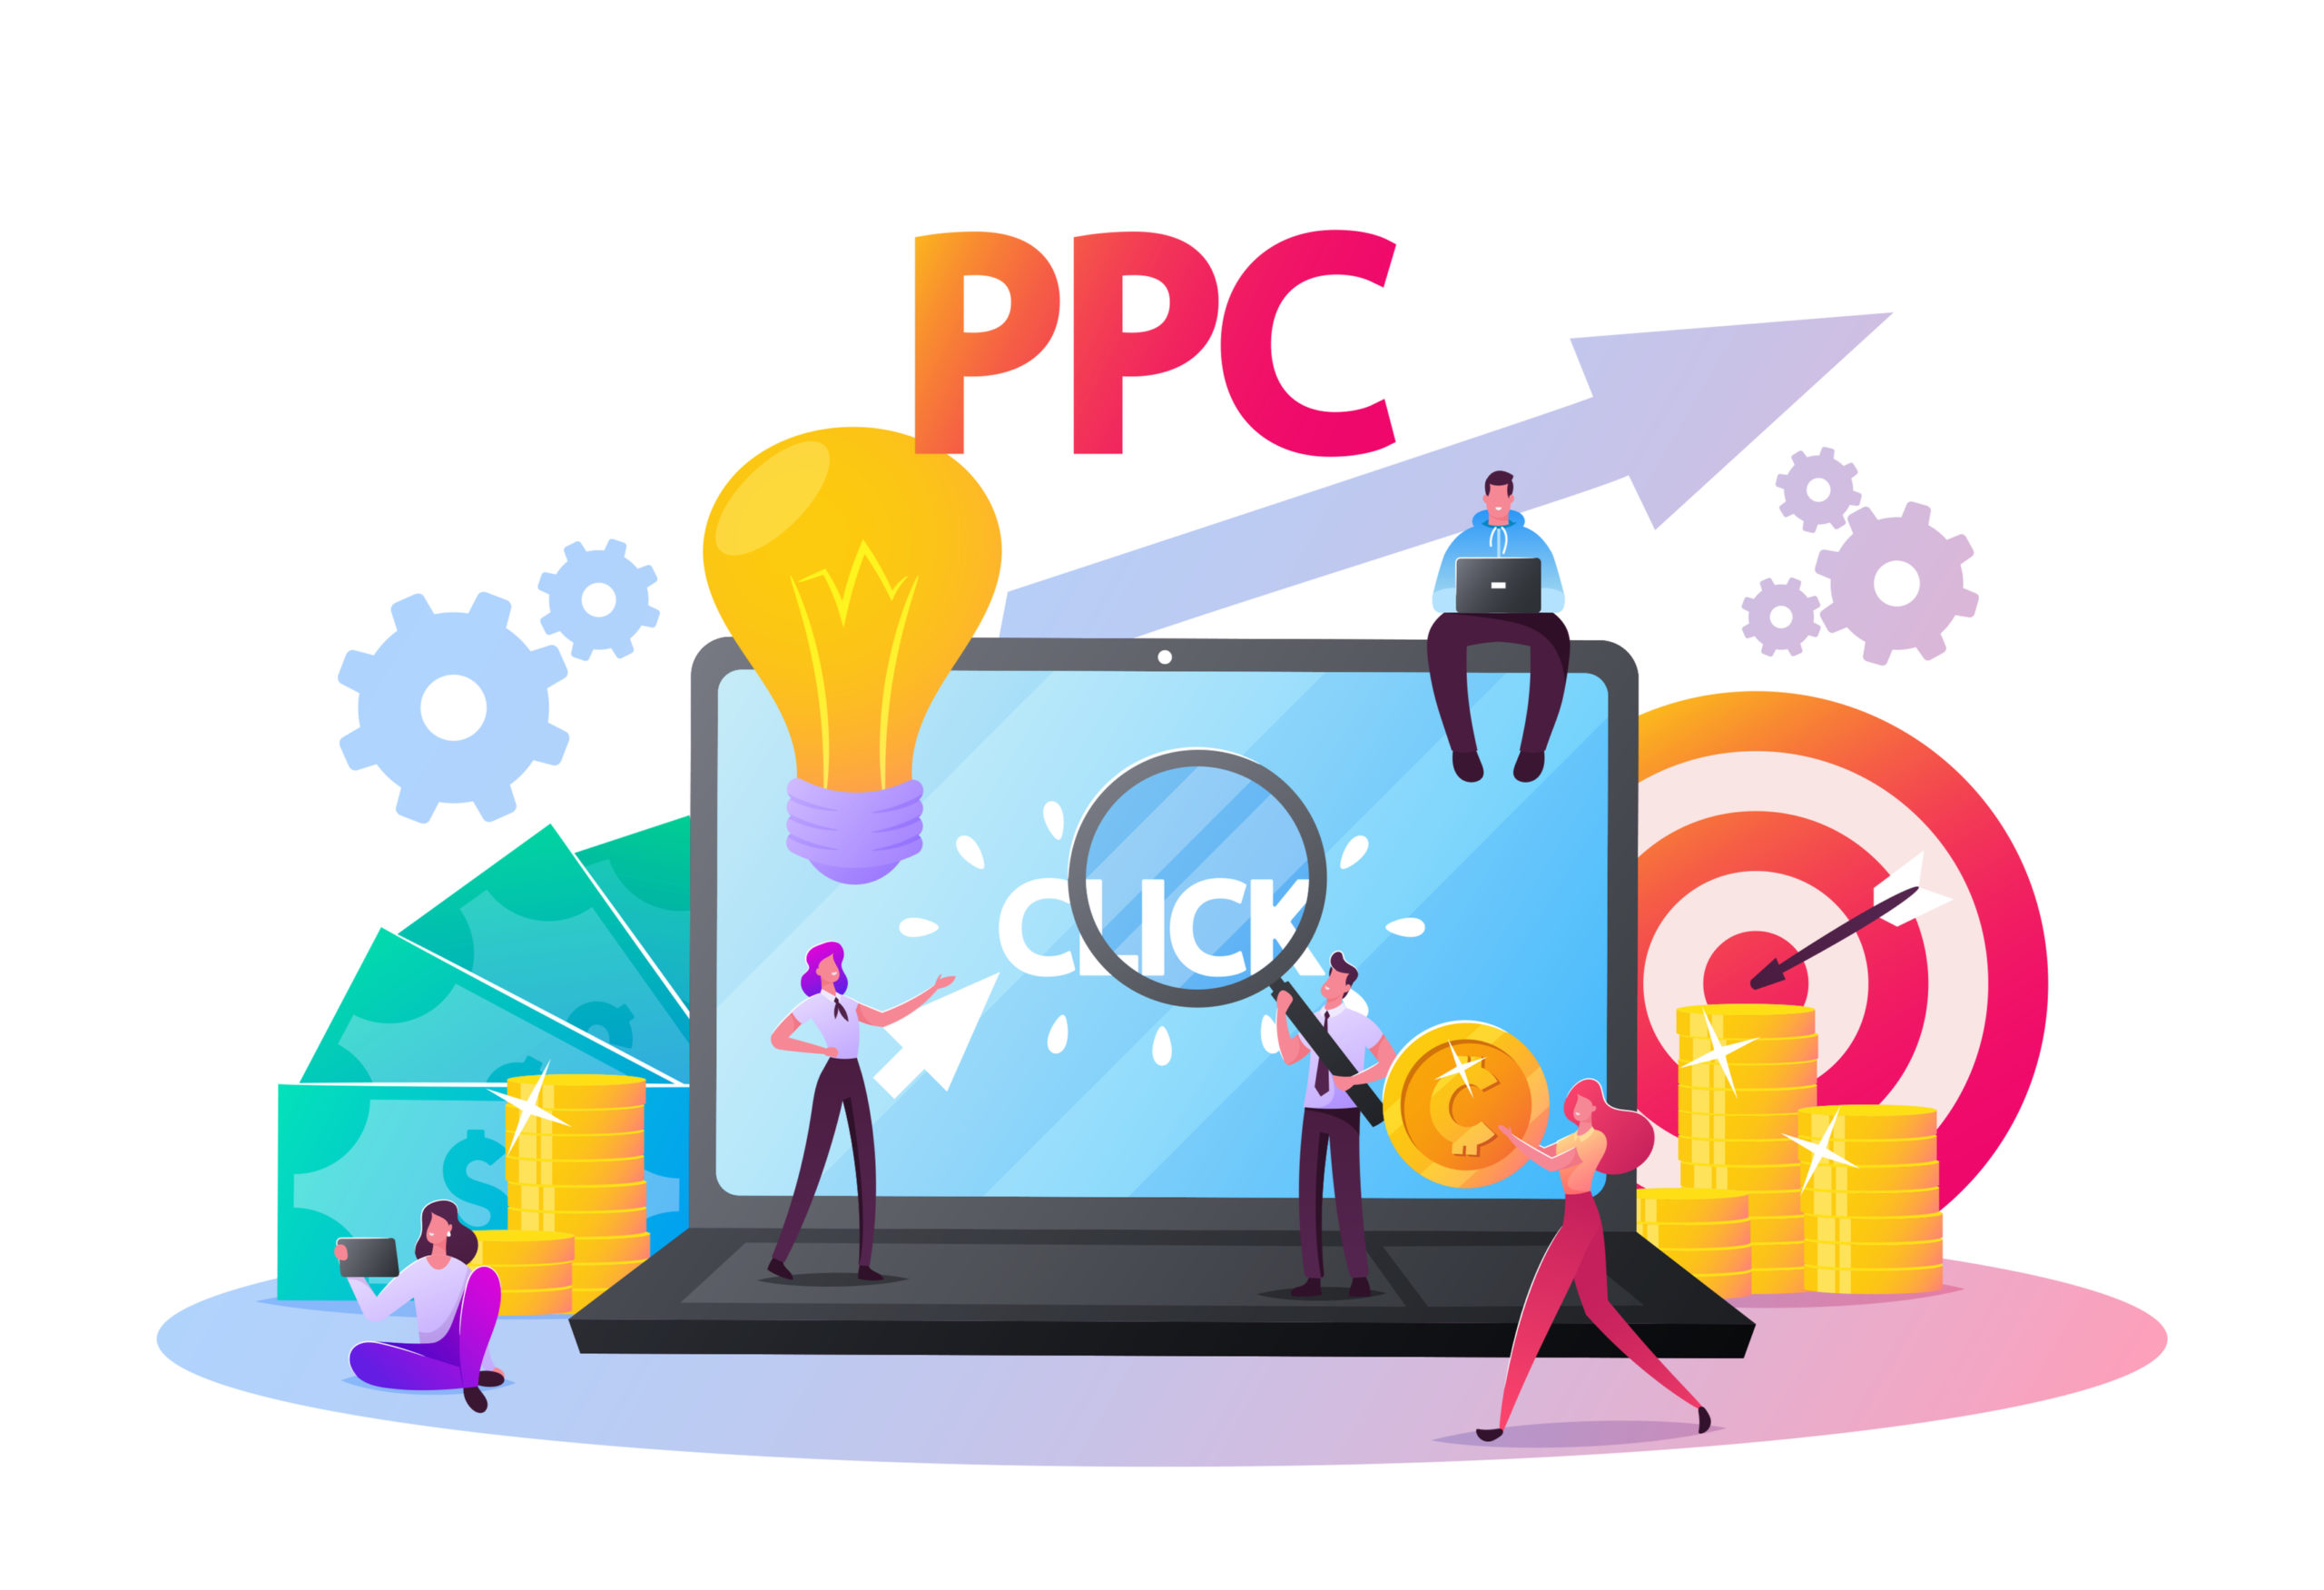 A group of people are working together to optimize a PPC campaign using data analysis.